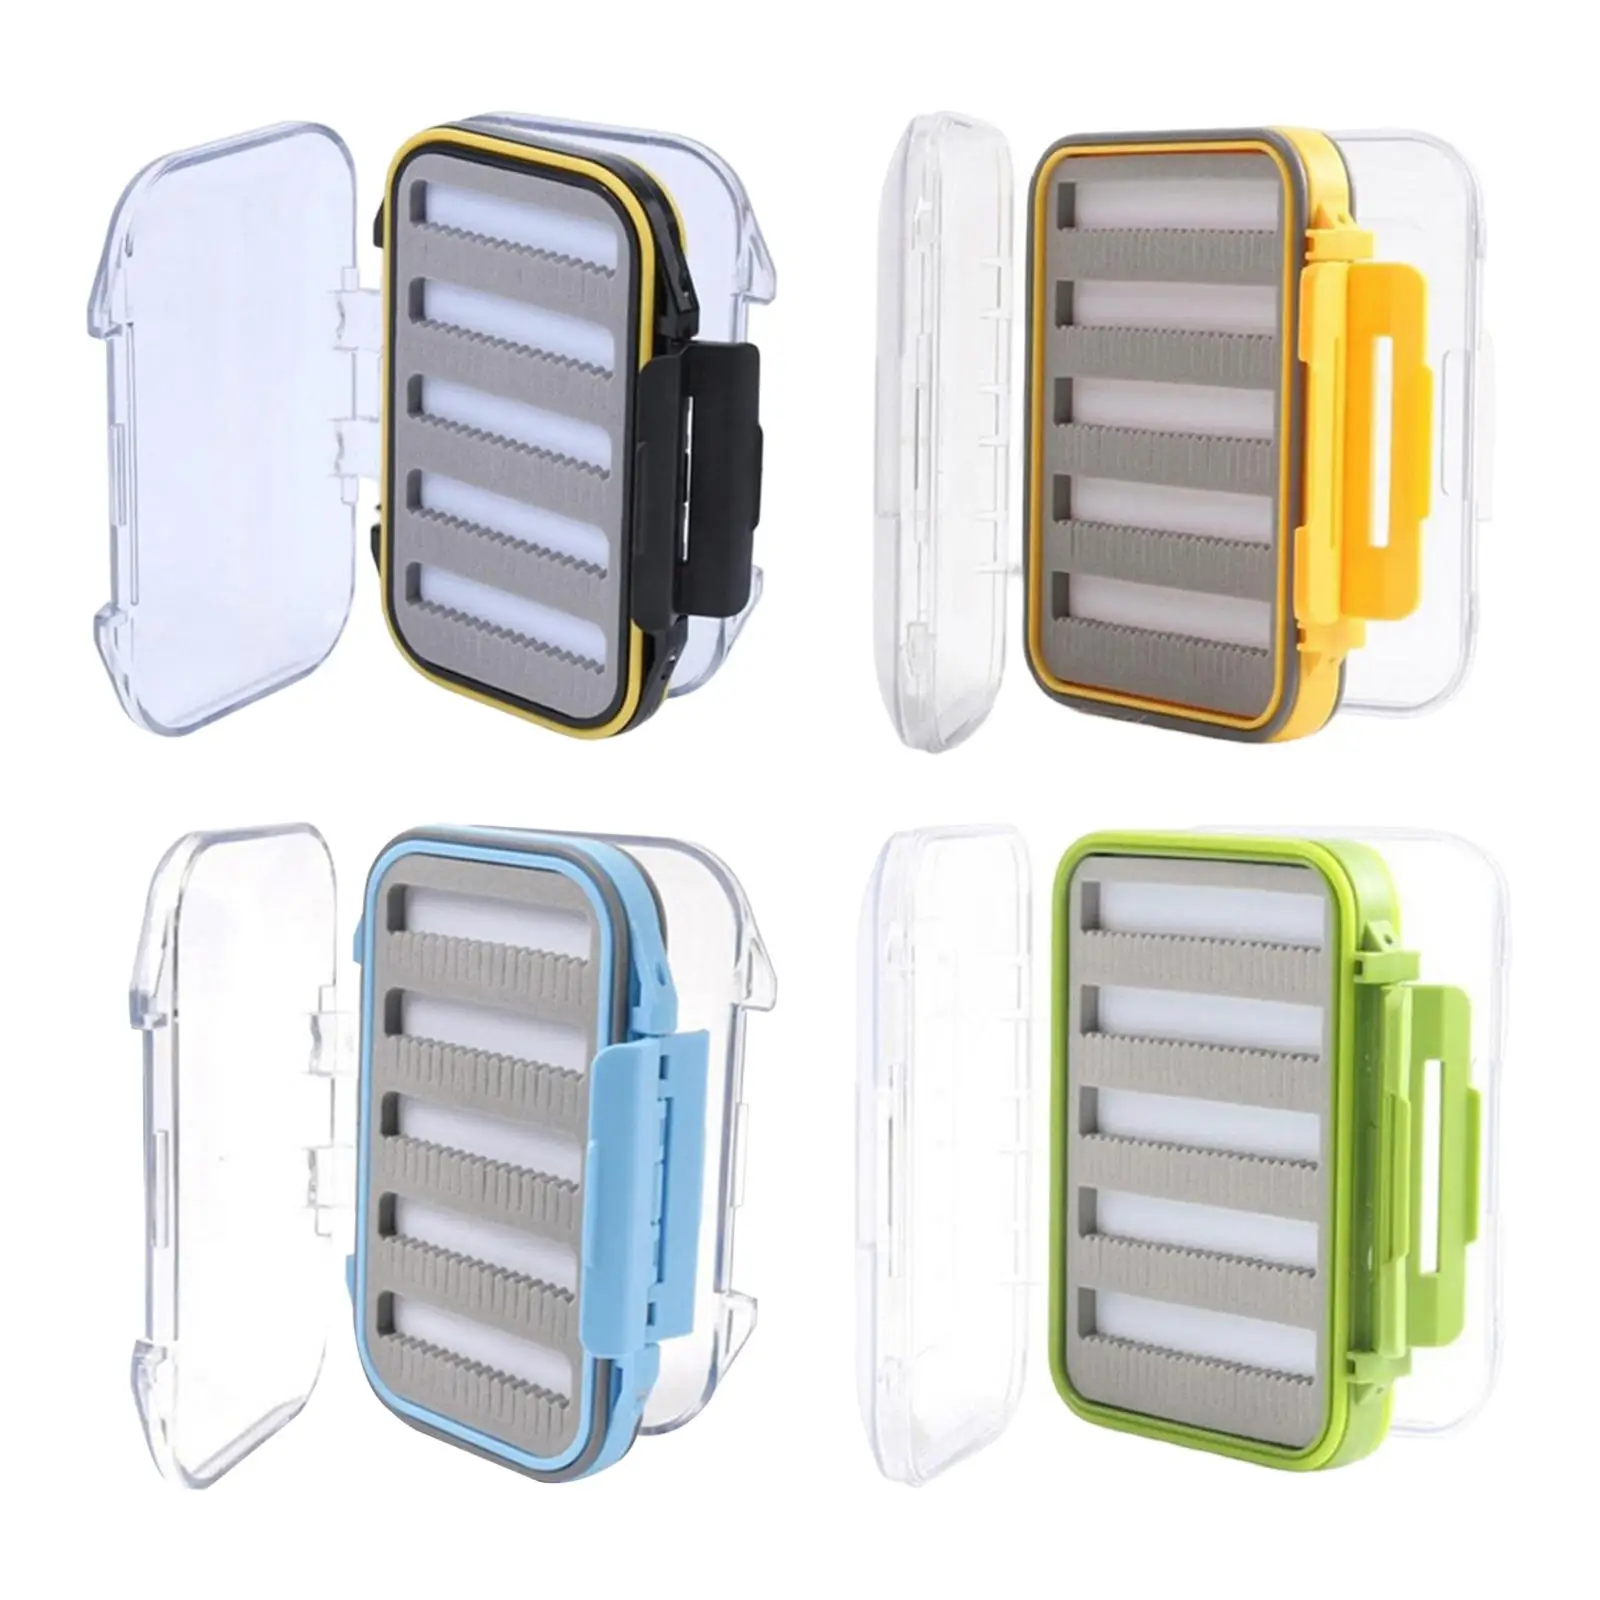 ABS  Waterproof Fly Fishing Box Case 3x1.3x4inch clear Lid Elegant Easy Grip Two Sided  latches Durable